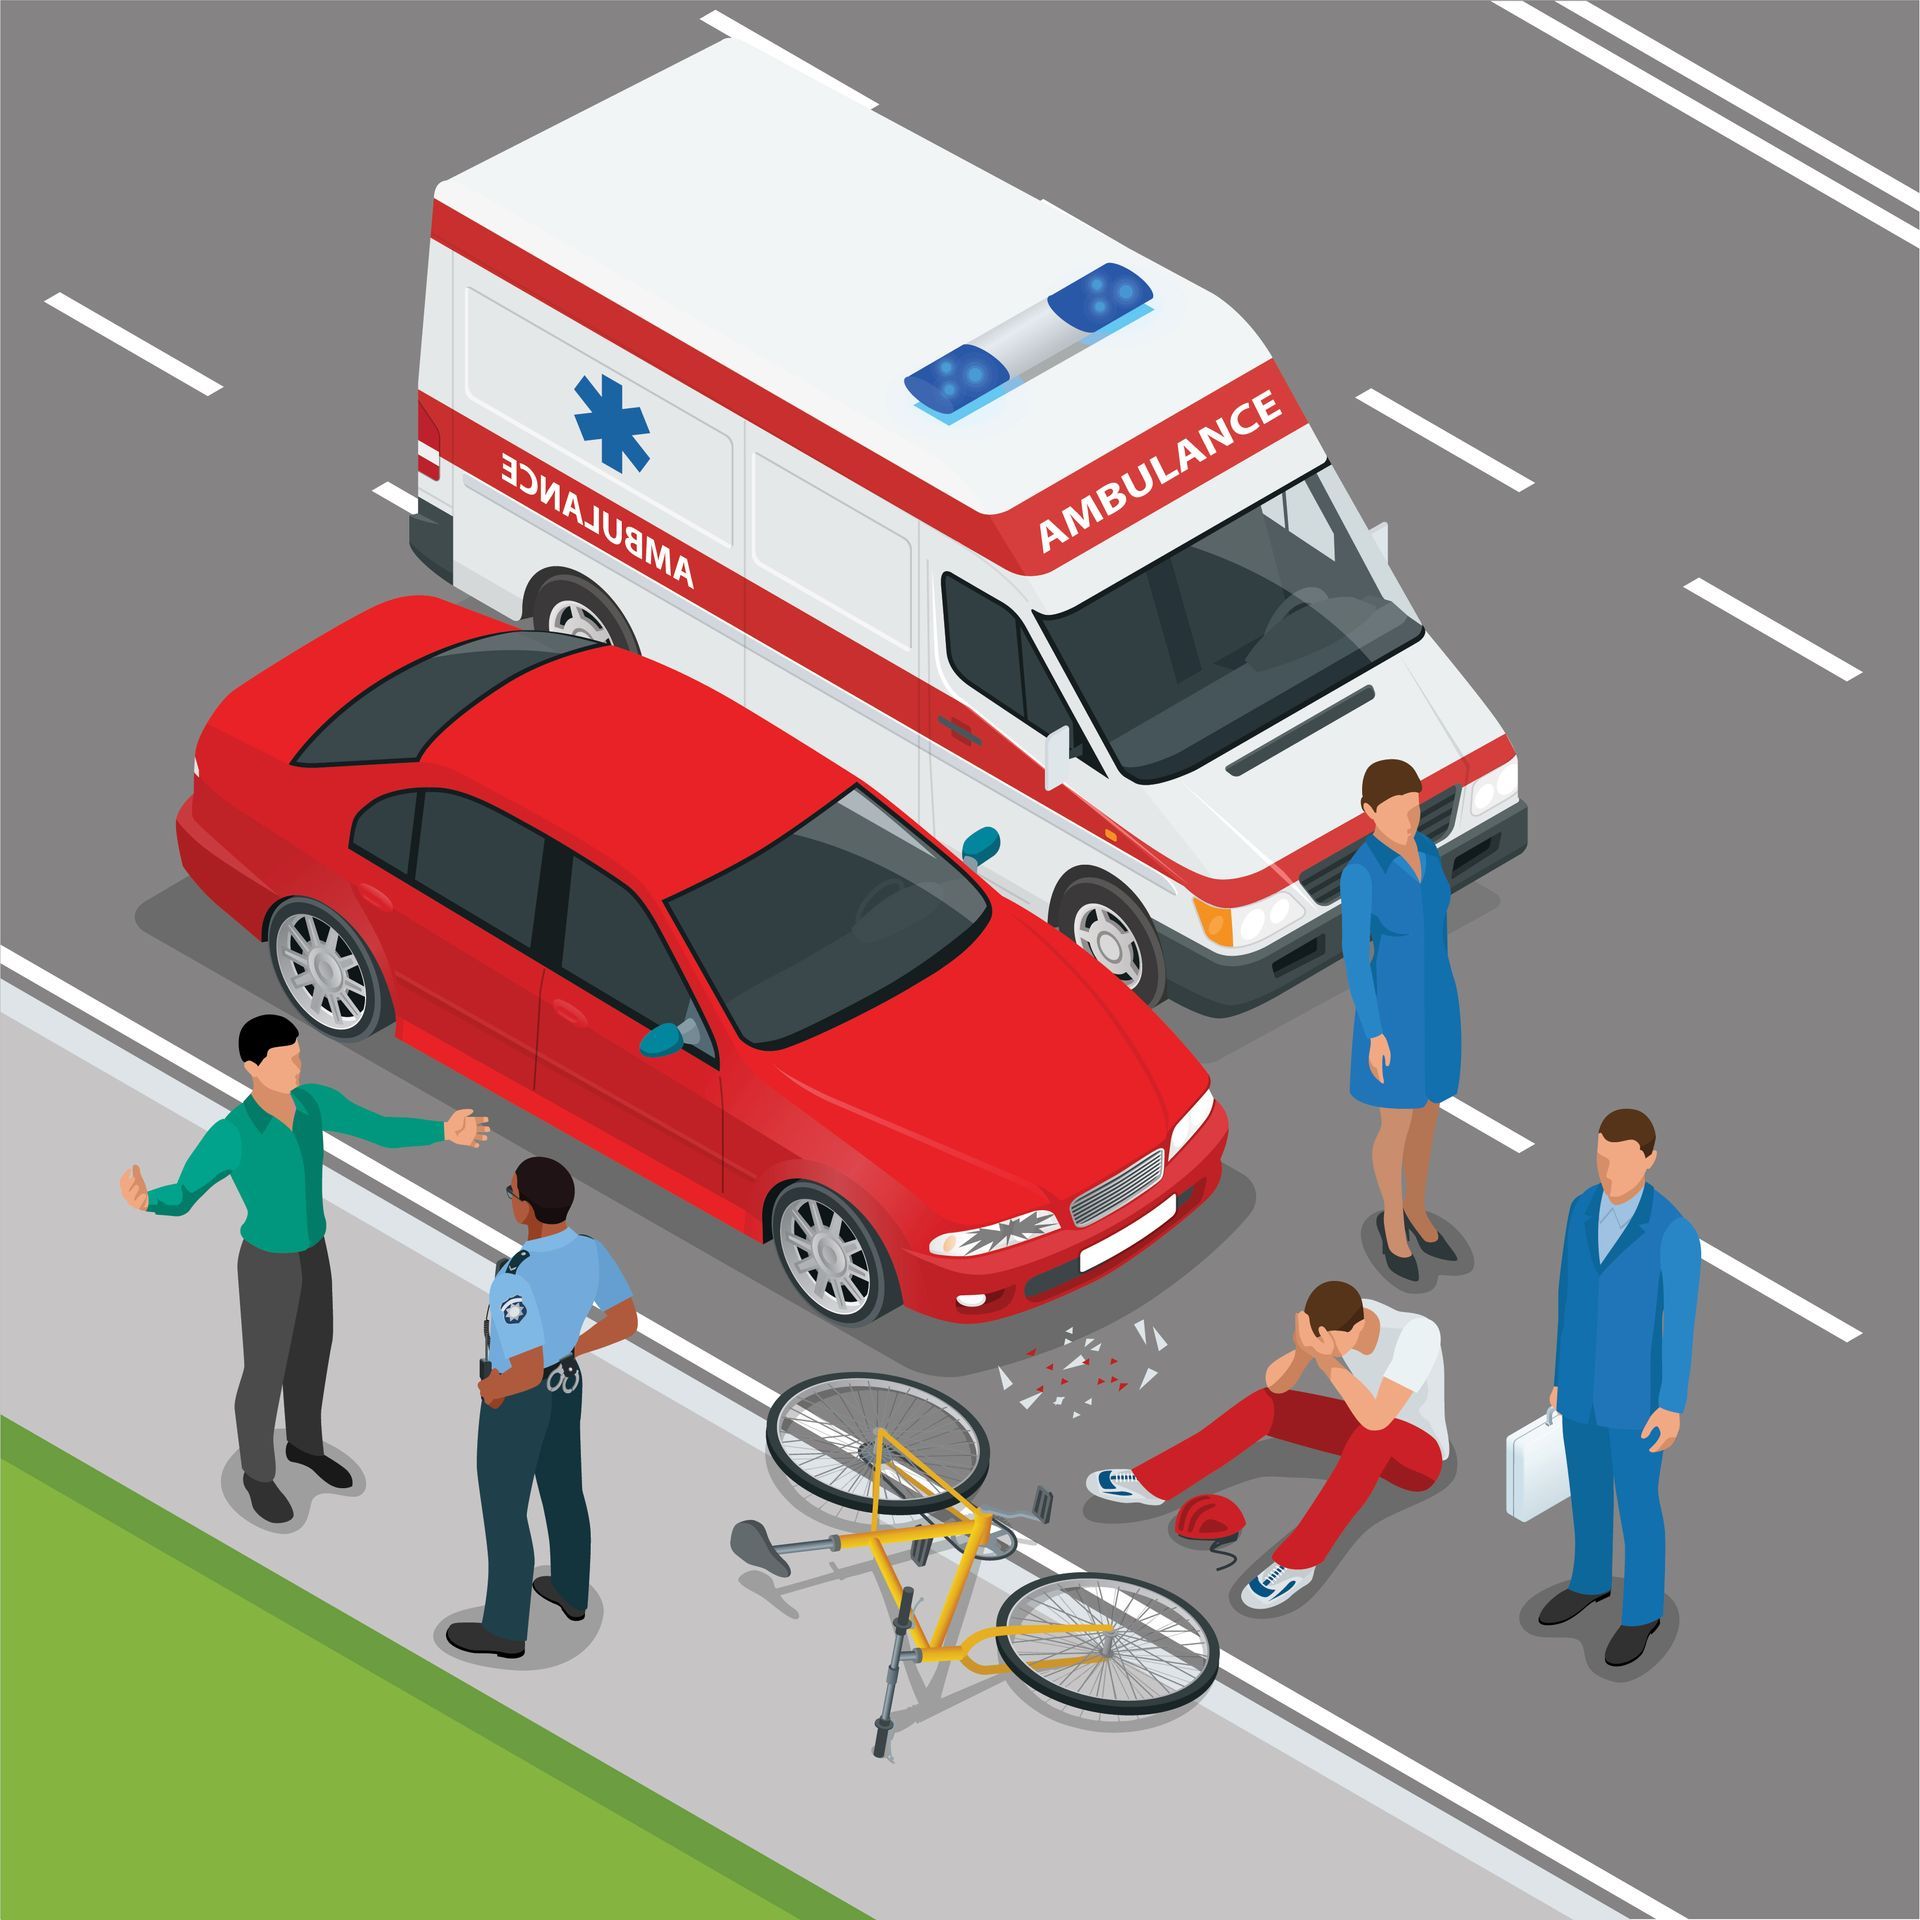 Cartoon style image of cyclist involved in a crash with a car